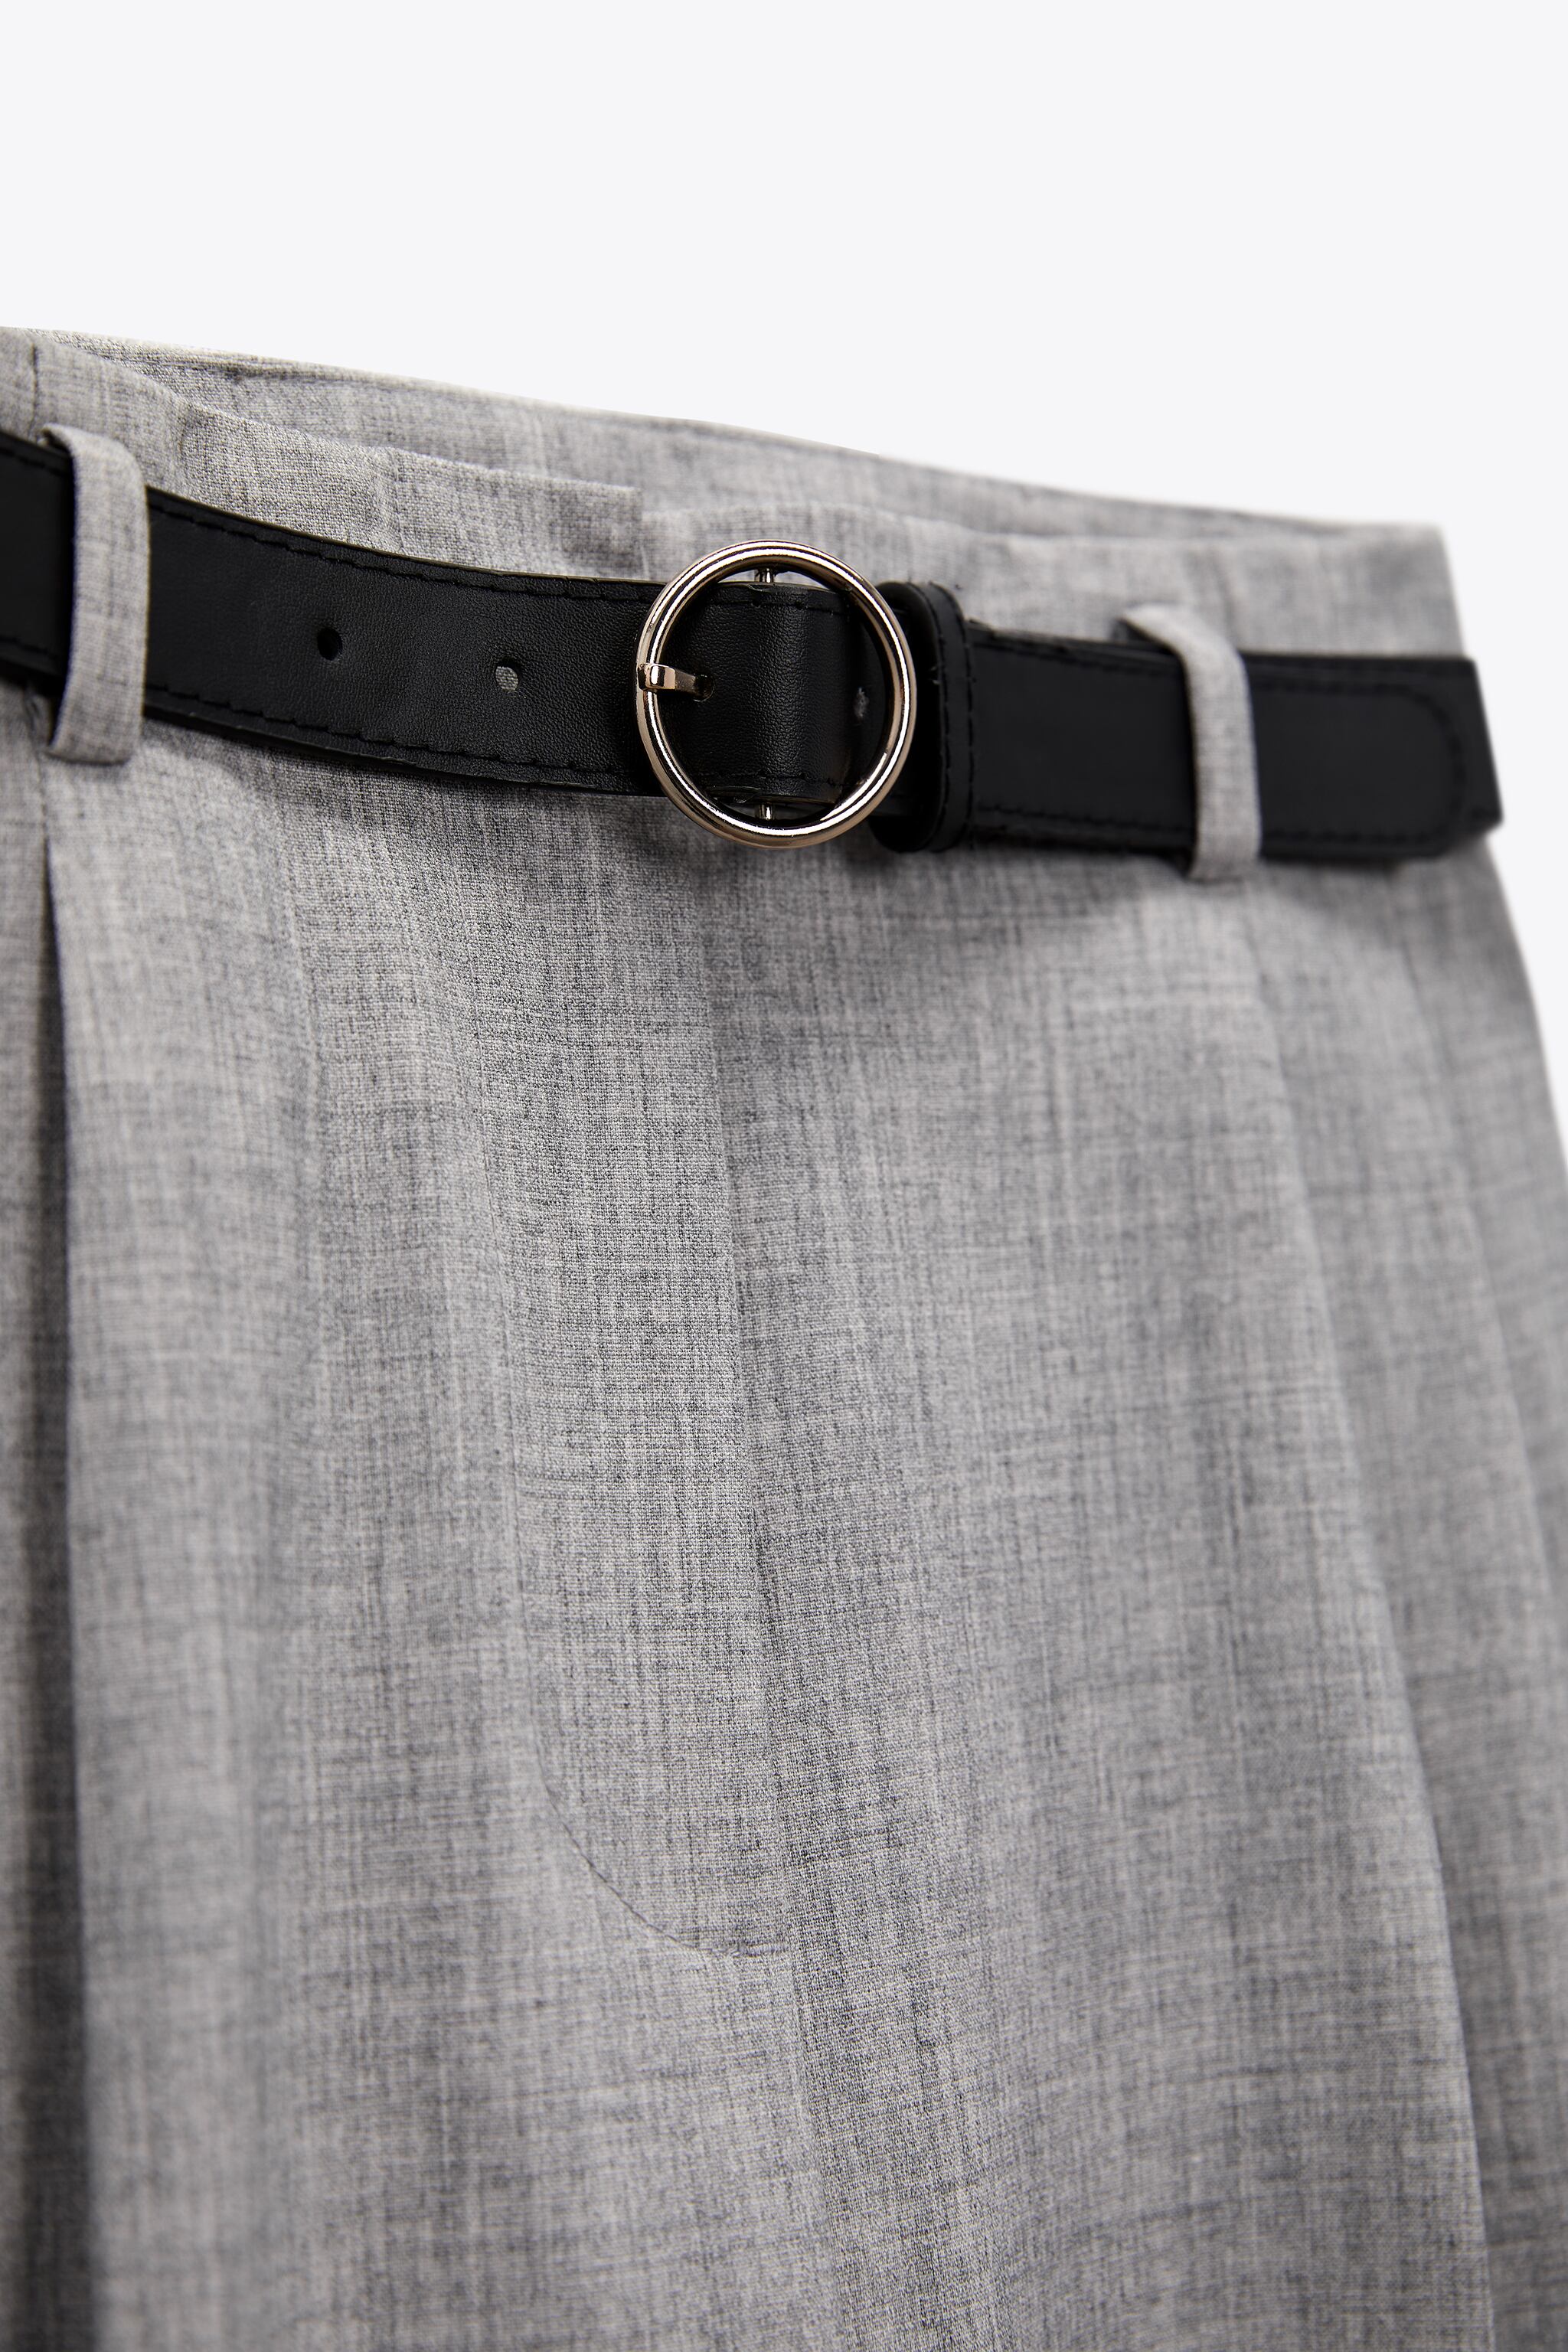 BELTED PLEATED PANTS